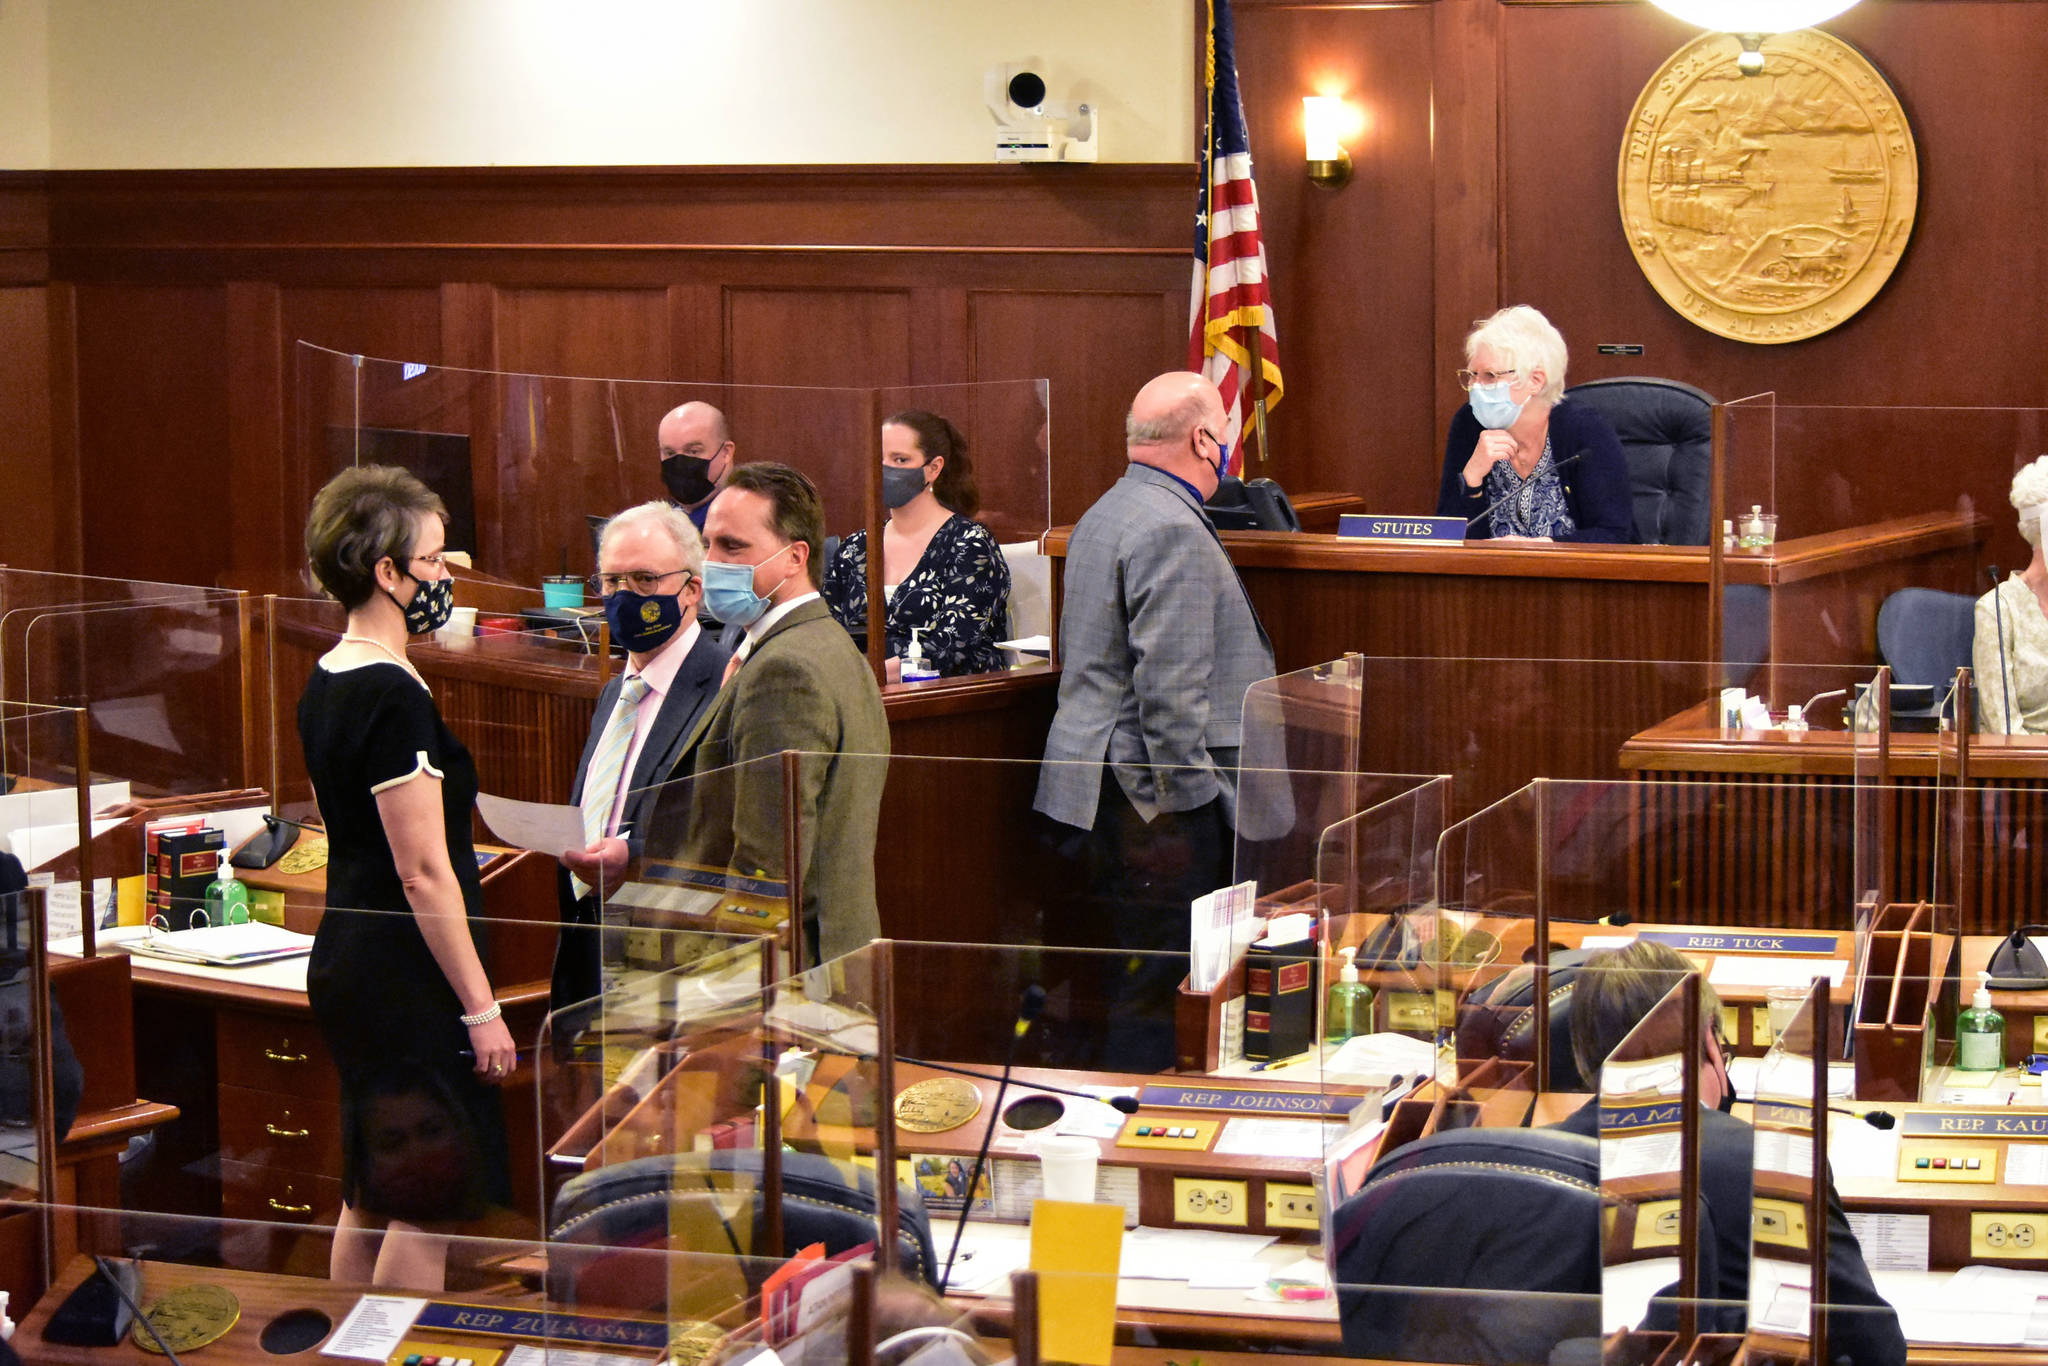 Lawmakers on the floor of the Alaska House of Representatives discuss an amendment on an education funding bill on Wednesday, April 21, 2021. Some House members are trying to pass a budget specifically for education, a departure from past years. (Peter Segall / Juneau Empire)